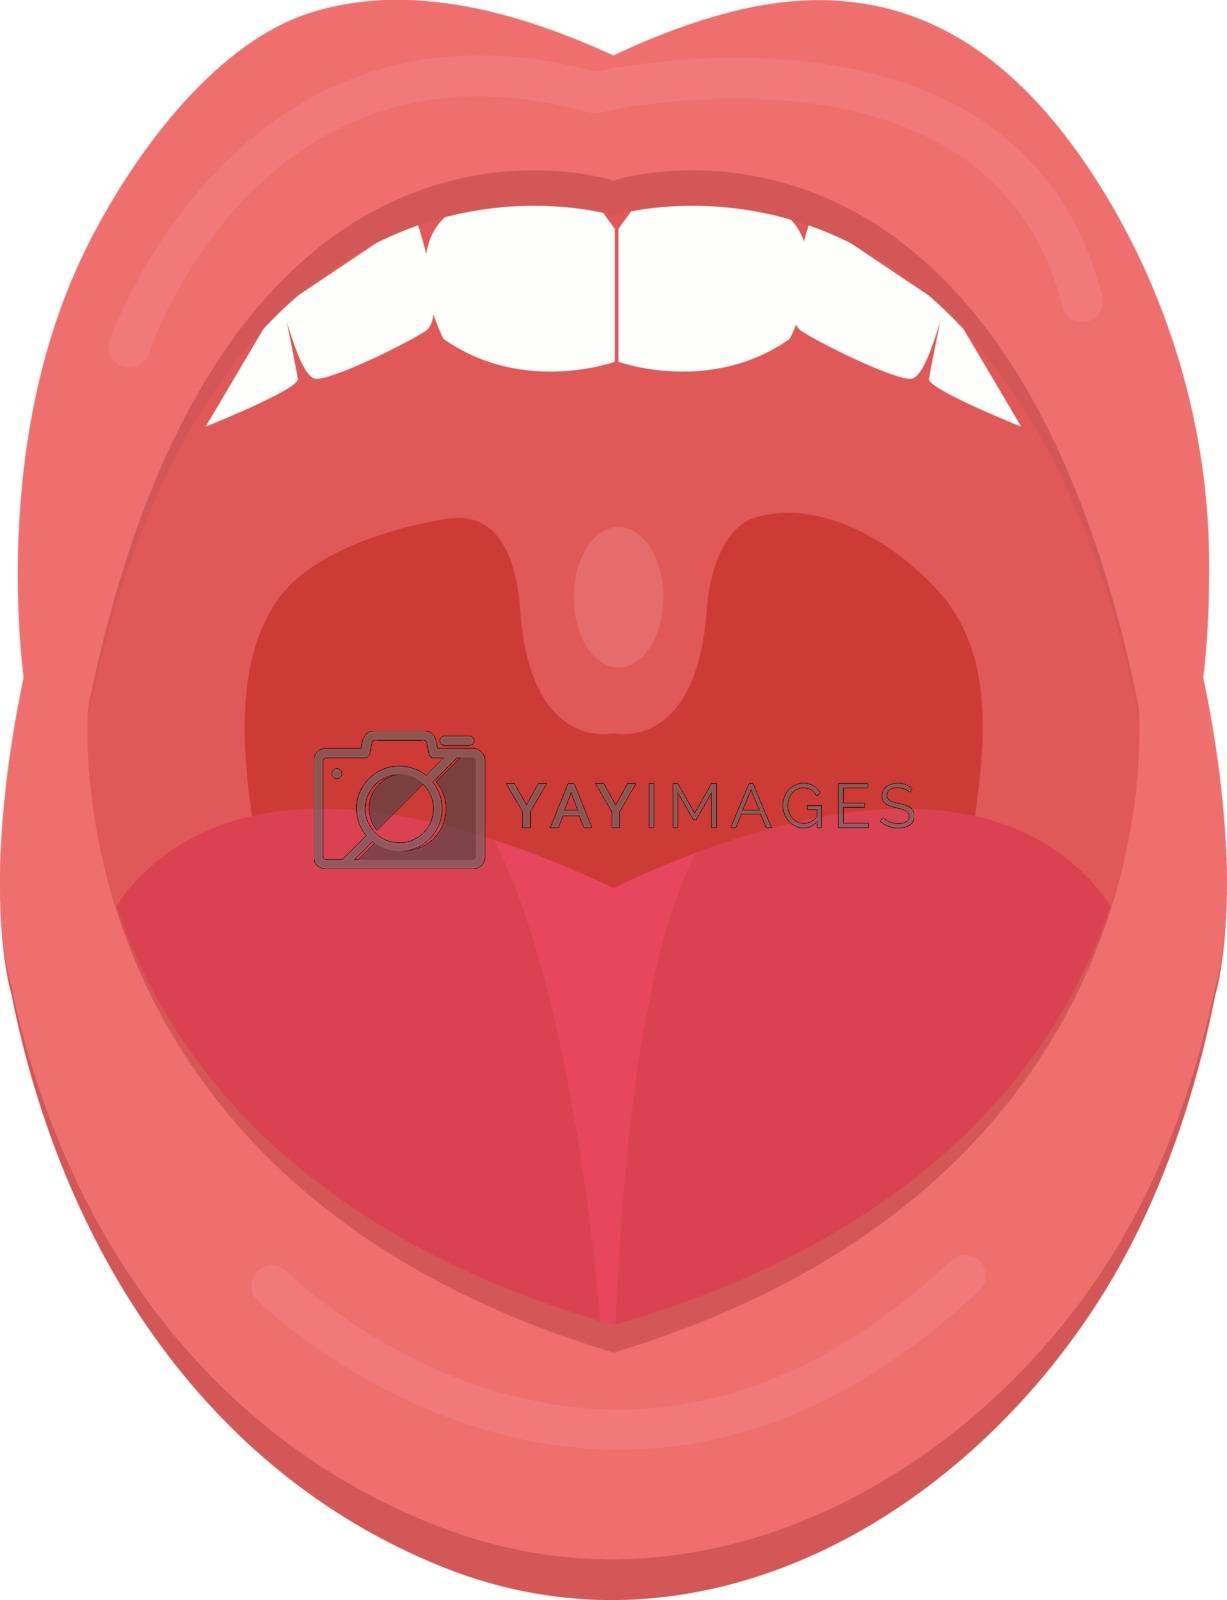 Royalty free image of Open mouth icon flat style. Throat, tonsils. Scream. Medicine treatment concept. Vector illustration. by lucia_fox